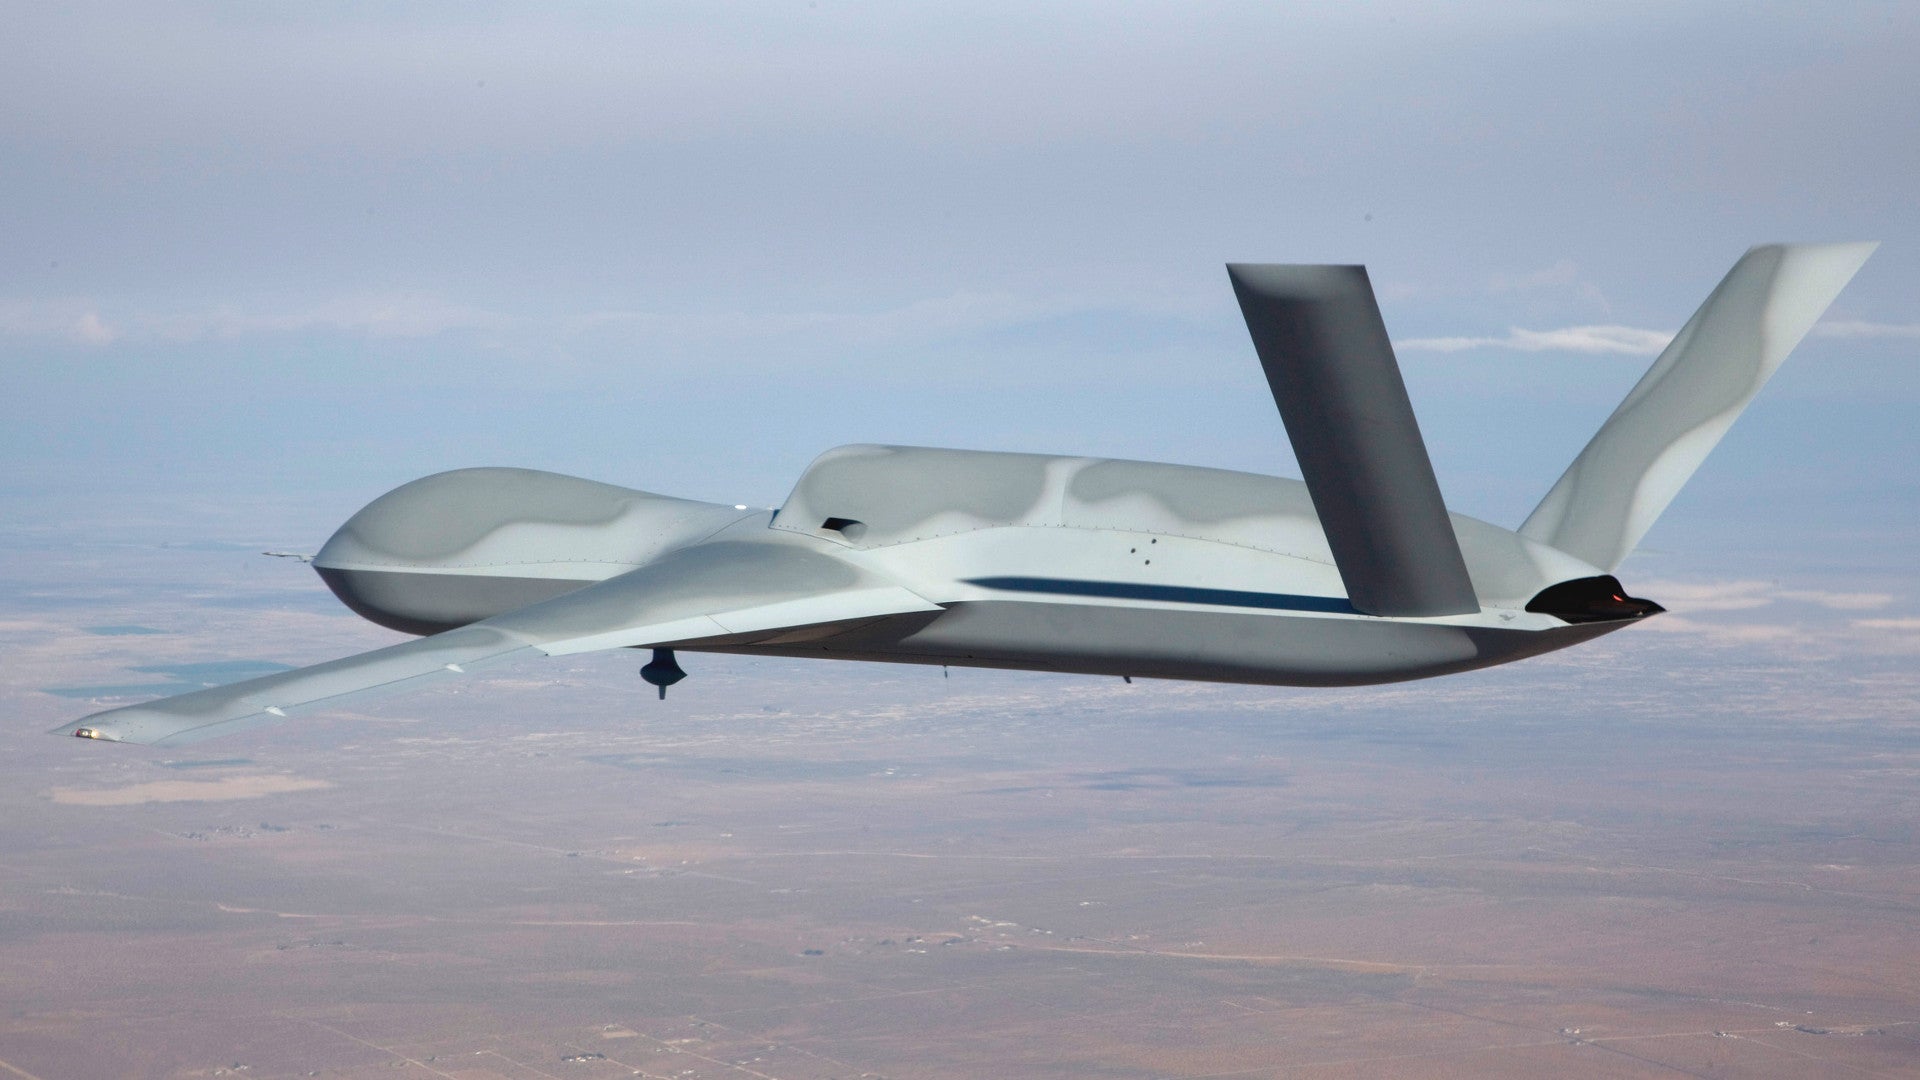 General Atomics Gives First Clues About its MQ-25 Drone Tanker Design